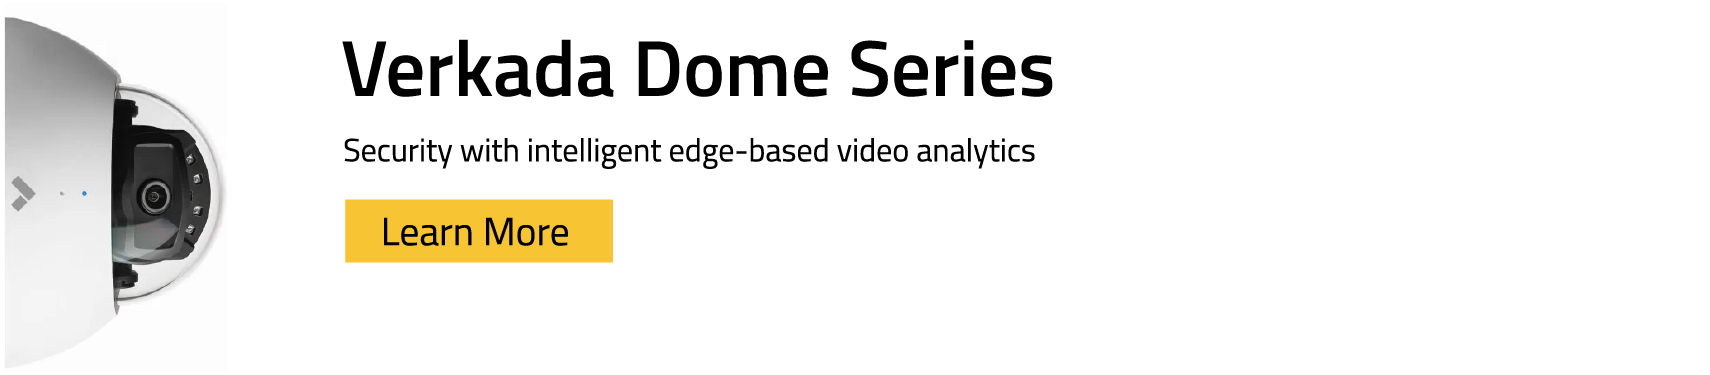 Dome Series Banner